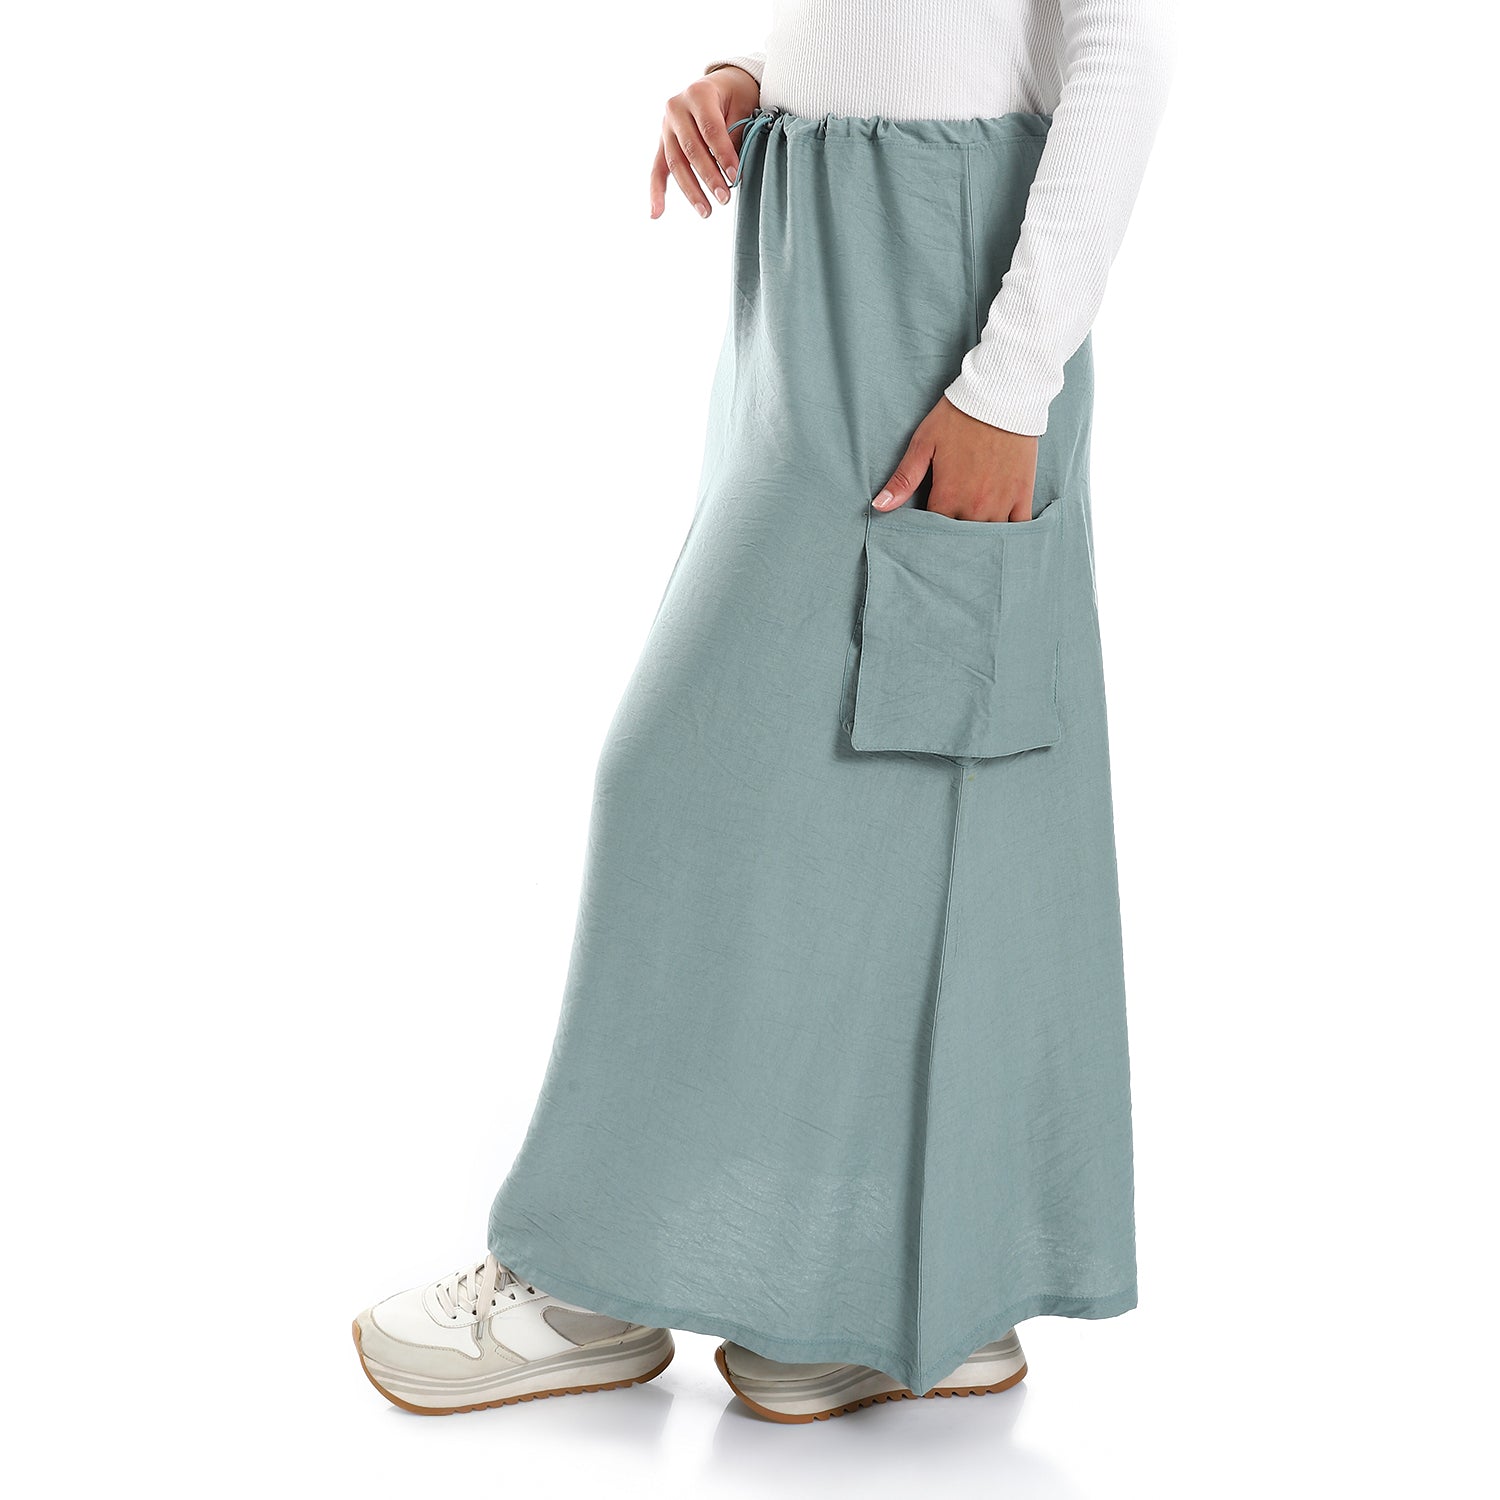 Double Closure Textured Casual Skirt